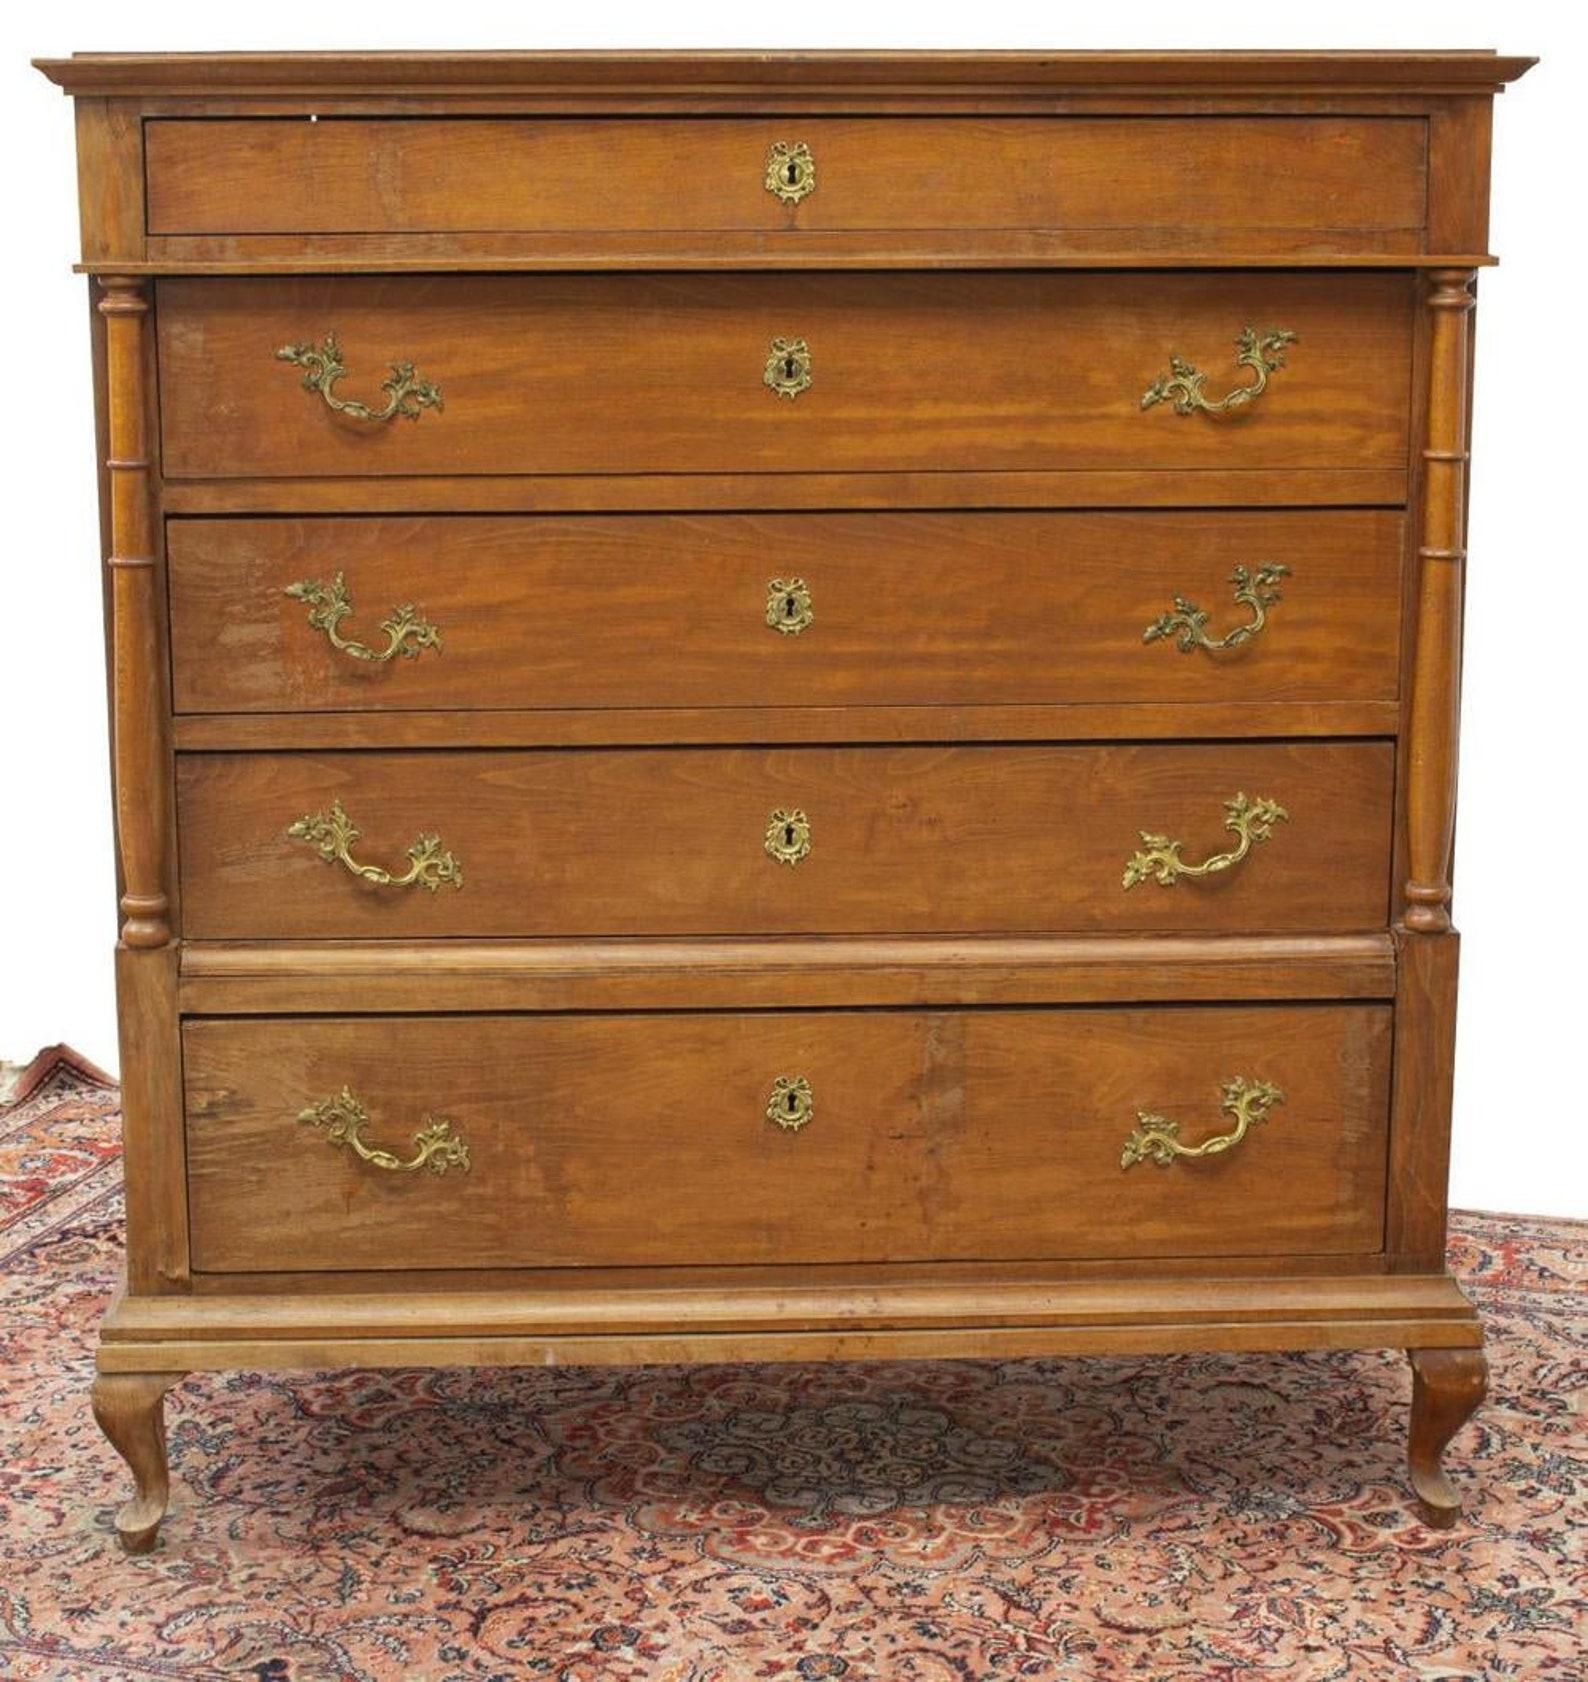 19th Century Danish Chest of Drawers In Good Condition For Sale In Forney, TX